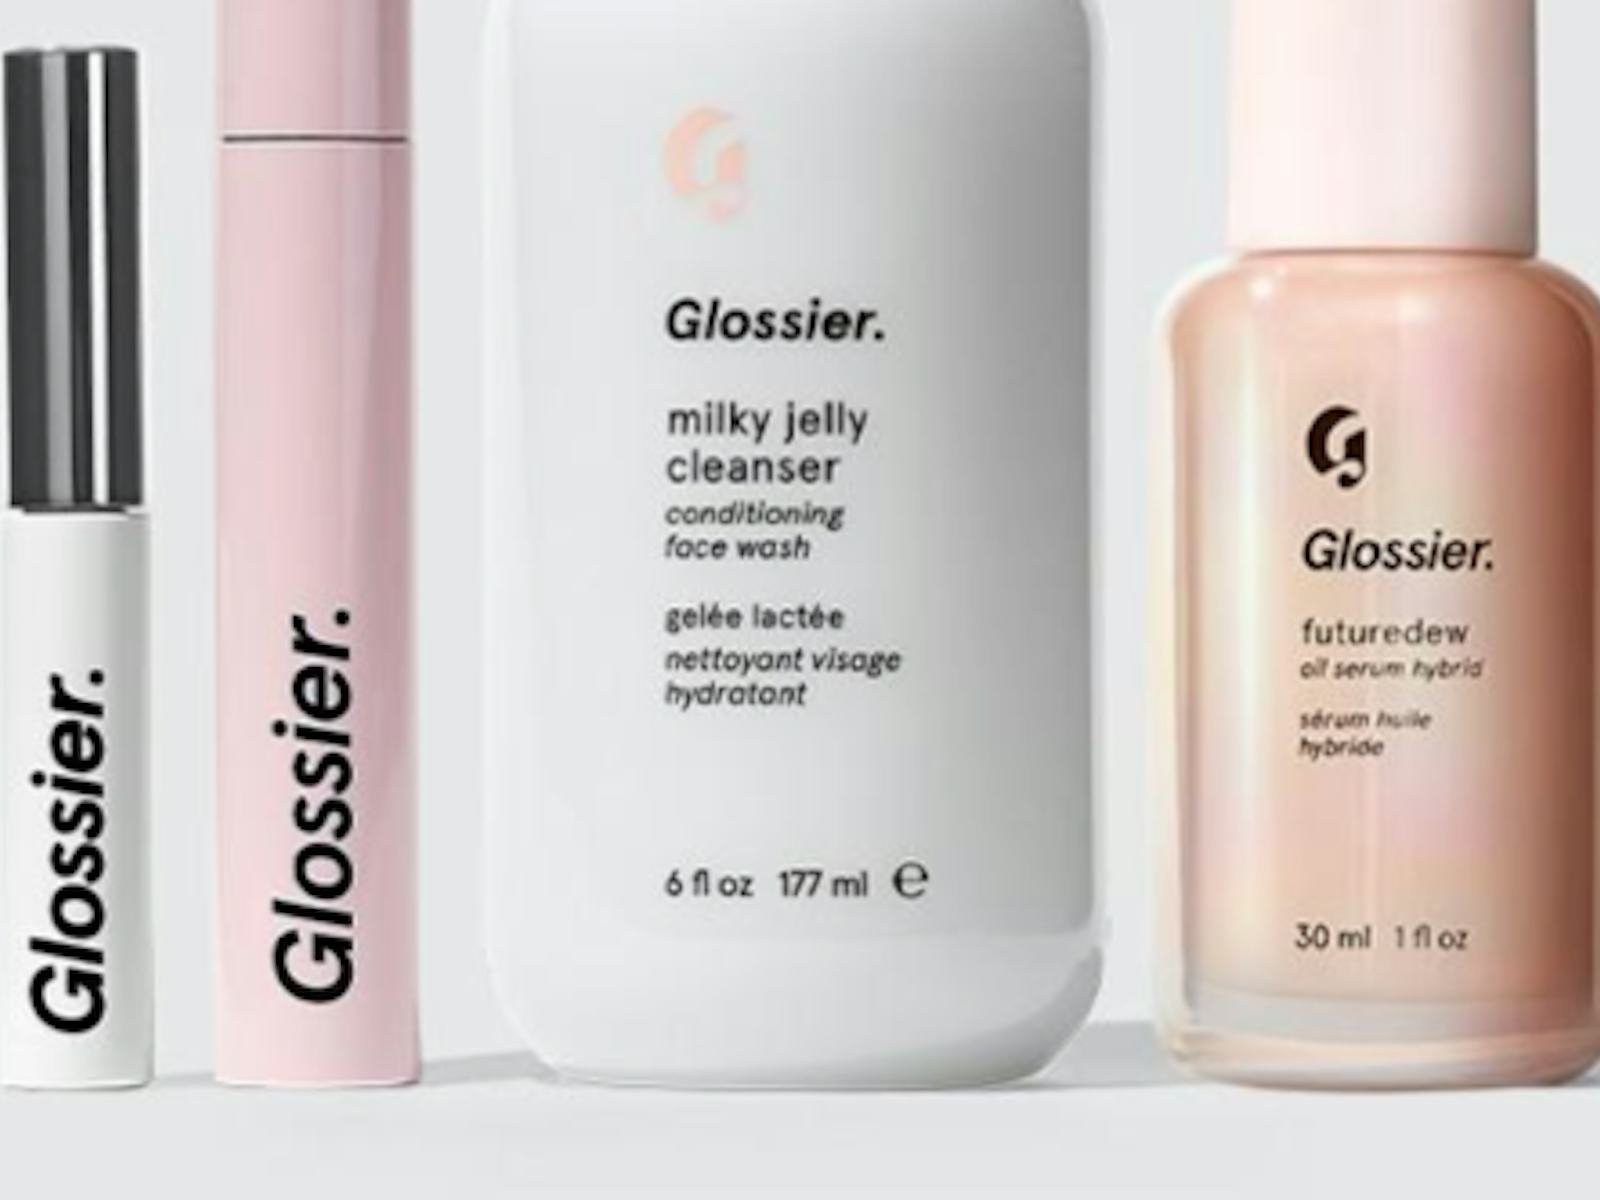 Glossier: A Thoroughly Modern Beauty Brand